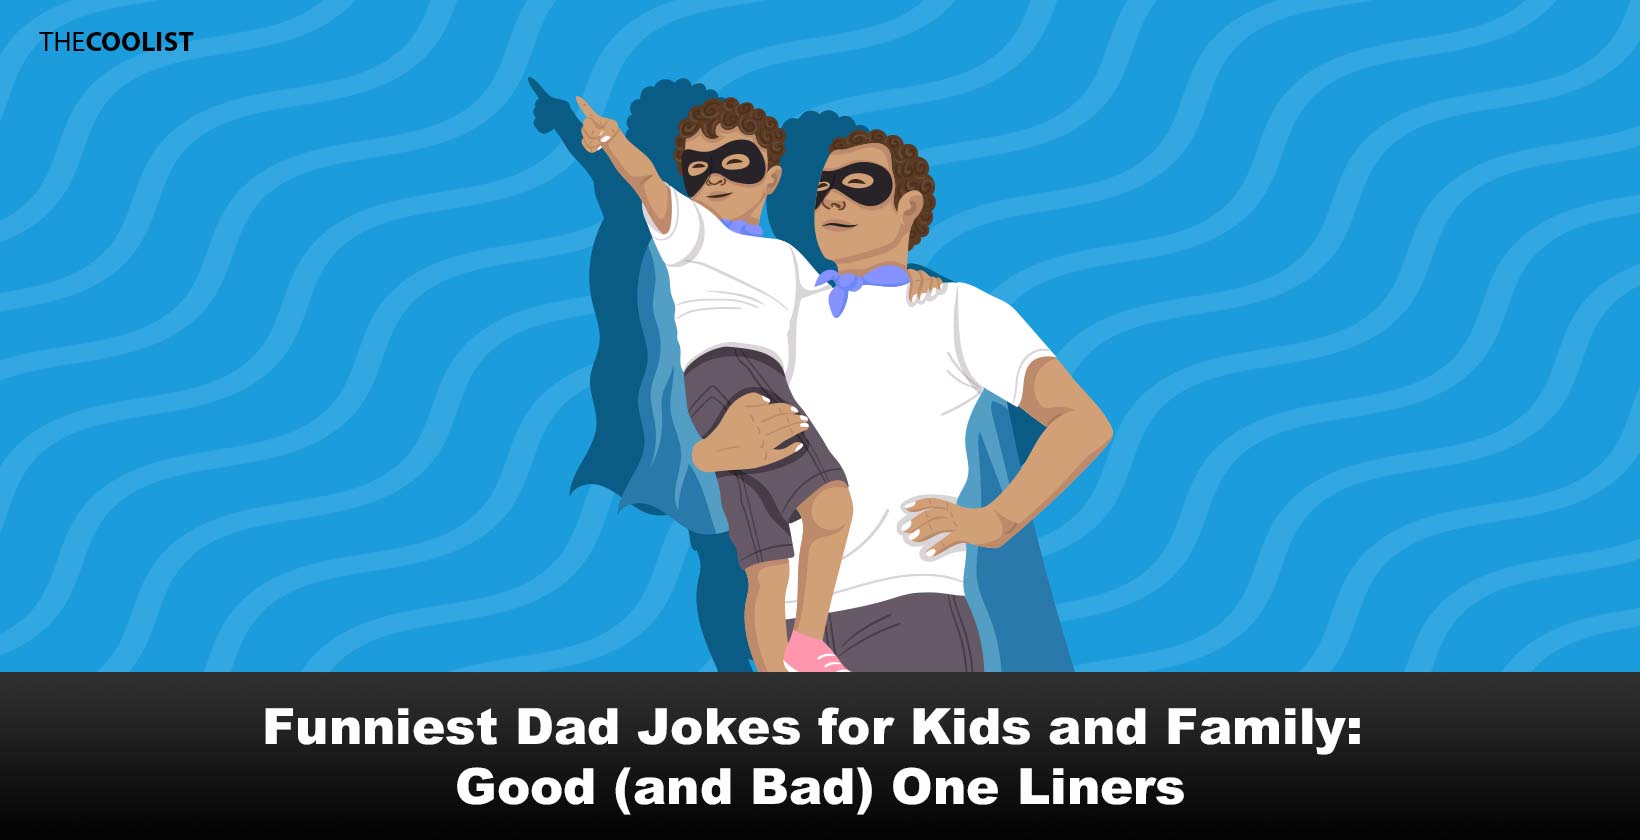 The funniest dad jokes, puns, and one-liners